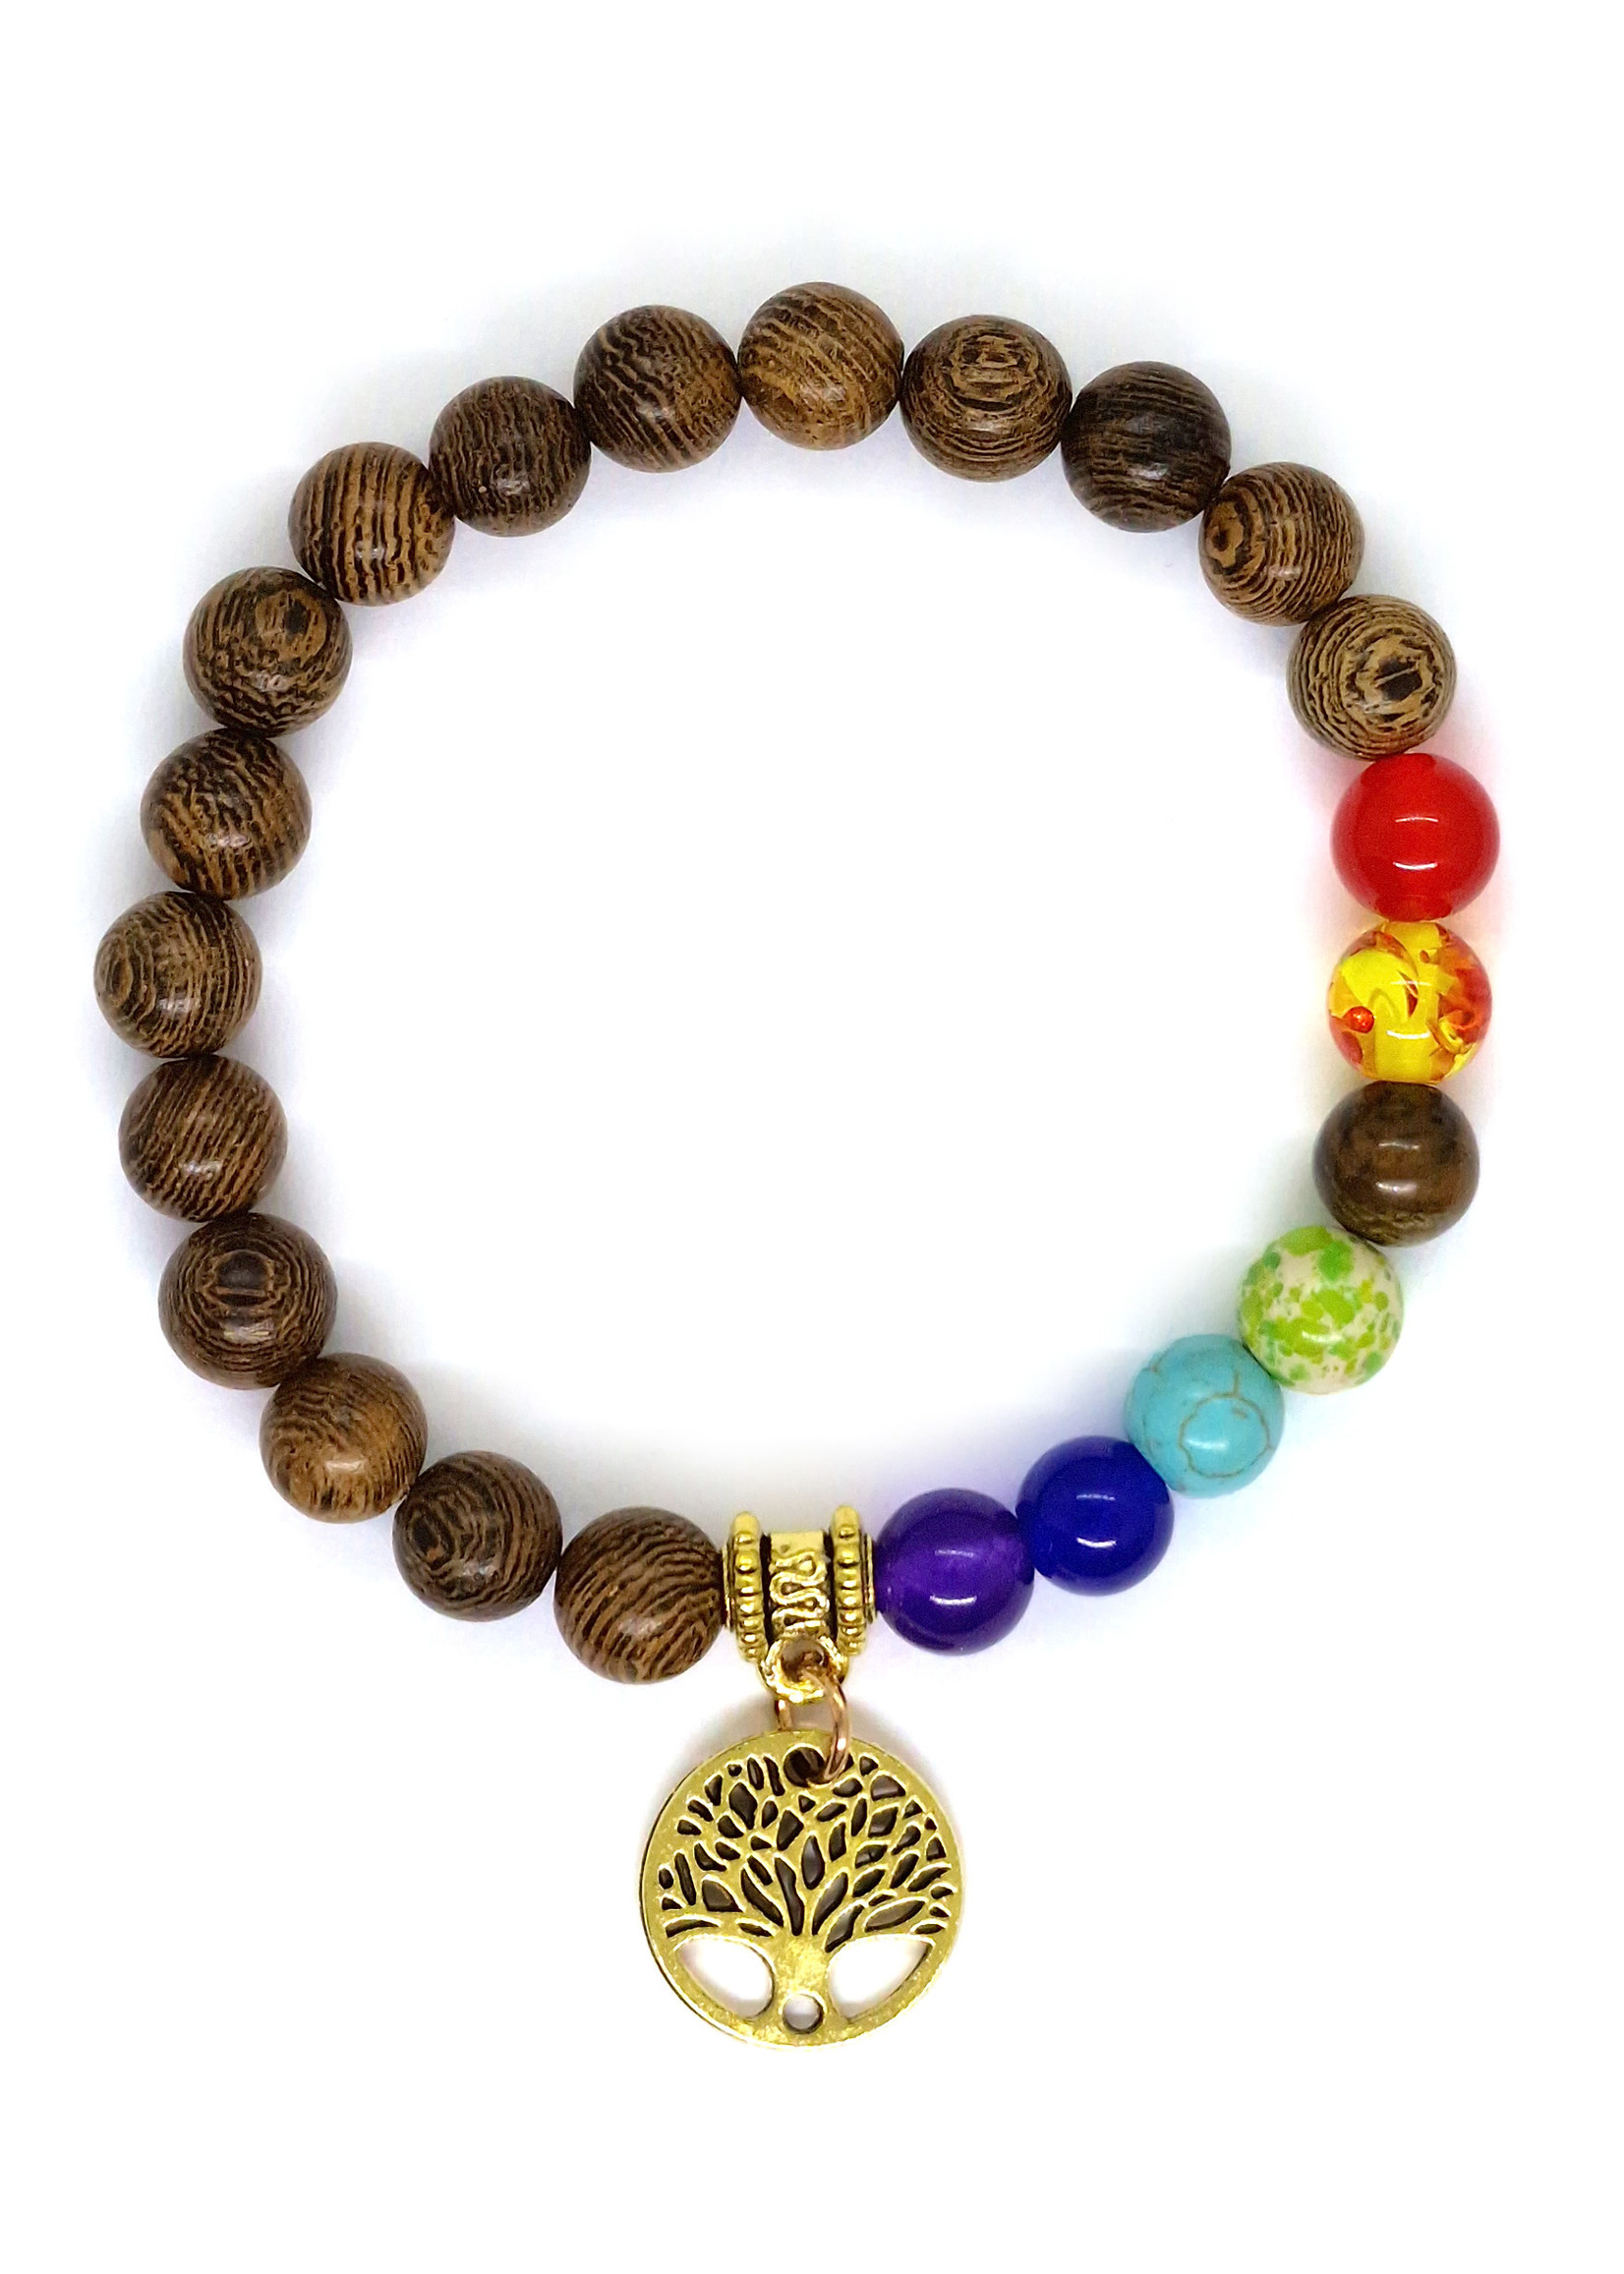 Wooden Bracelet with 7 Chakras and Tree, Stretchable